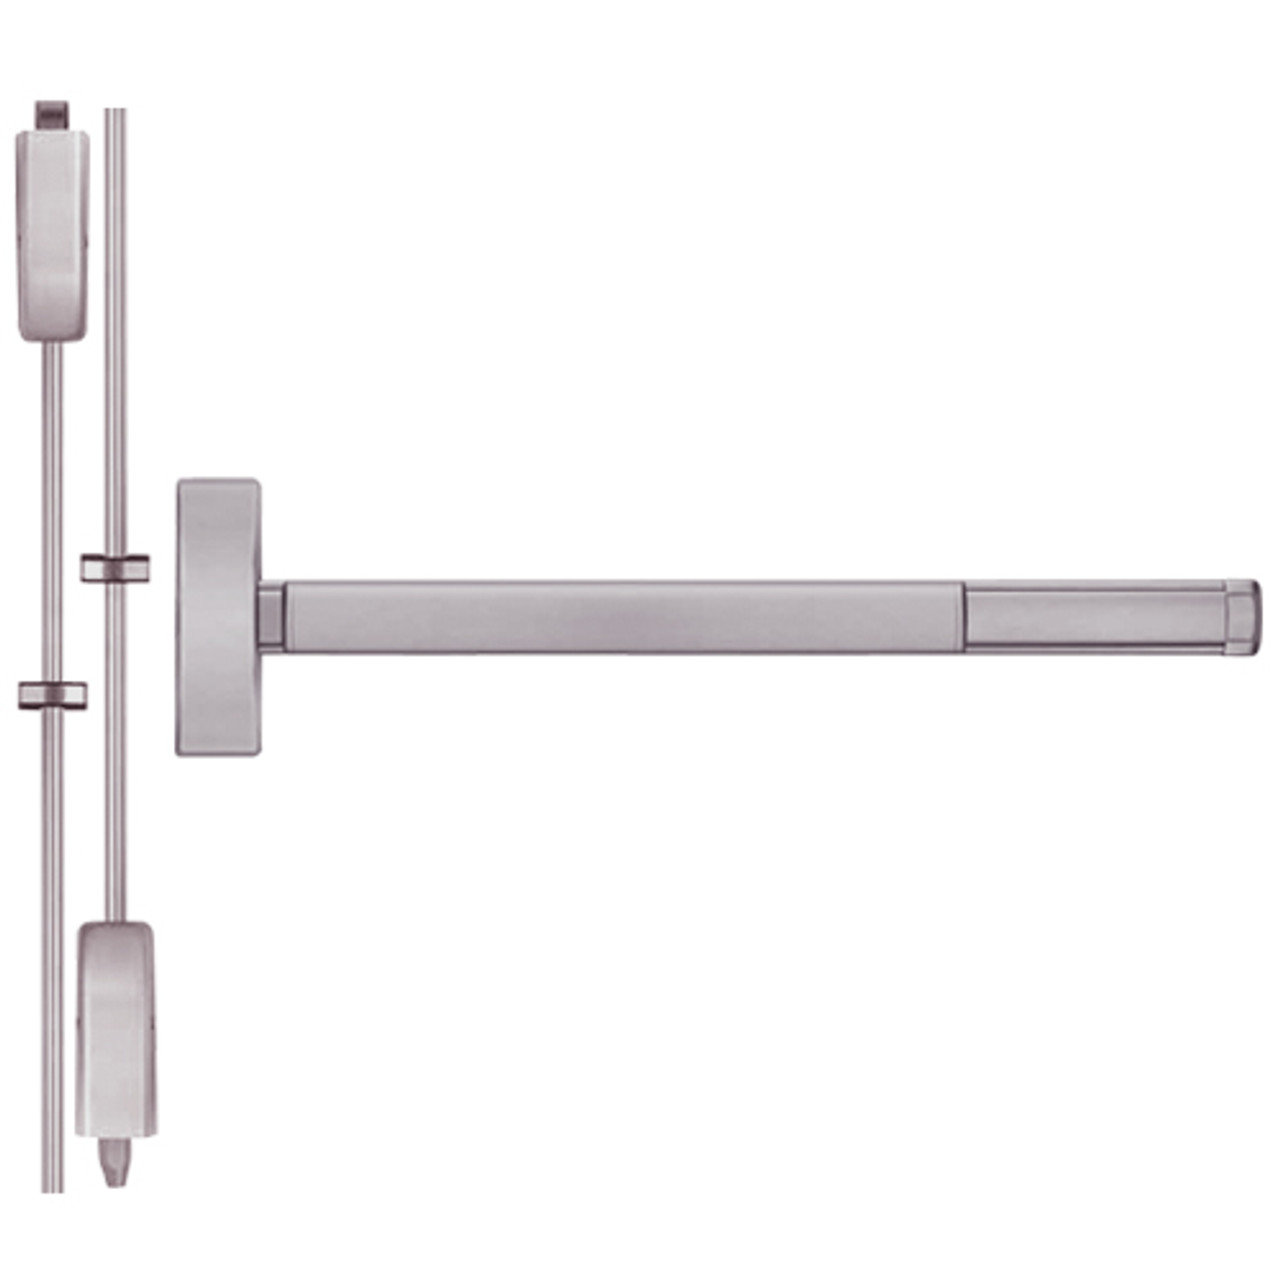 DE2215LBR-630-36 PHI 2200 Series Non Fire Rated Apex Surface Vertical Rod Device with Delayed Egress Prepped for Thumb Piece Always Active in Satin Stainless Steel Finish